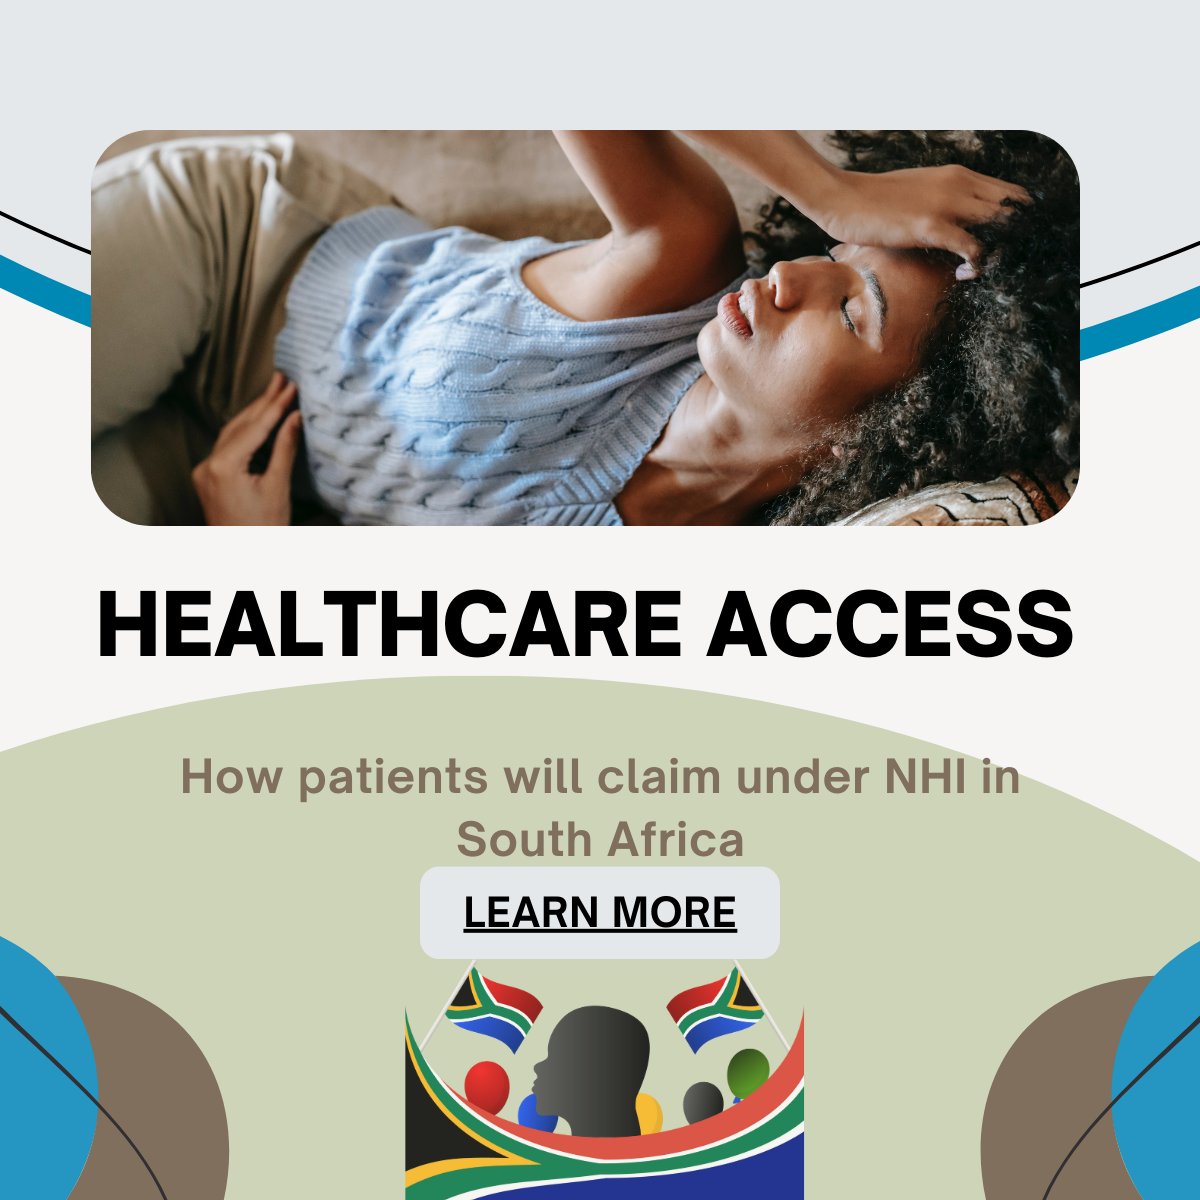 HEALTHCARE ACCESS. HOW PATIENTS WILL CLAIM UNDER NHI IN SOUTH AFRICA? Learn More: voicesforhealthsa.blogspot.com/2023/04/Health…

#NationalHealthInsurance #HealthForAll #SouthAfrica #NHI #UniversalHealthCoverage #UHC #tbt #TikTok